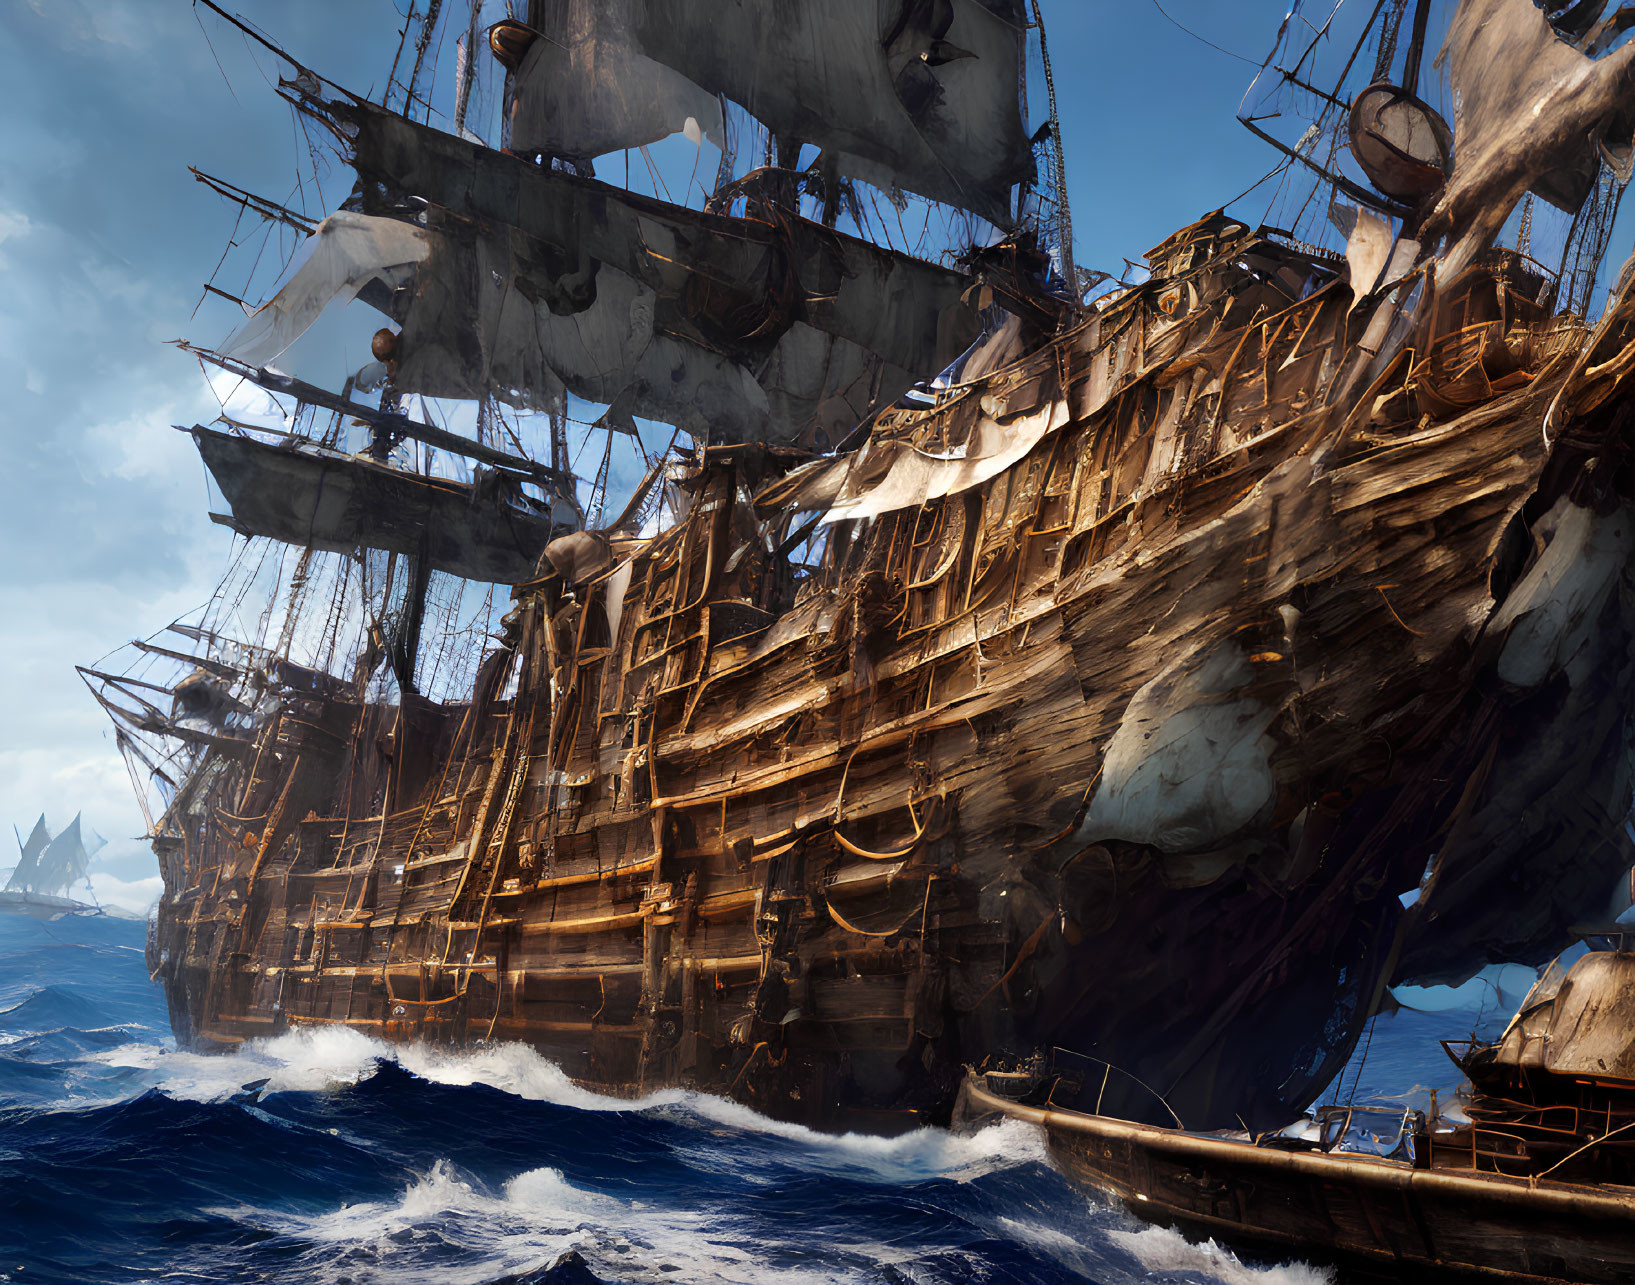 Historical naval battle scene with tall wooden ships and cannons on high seas